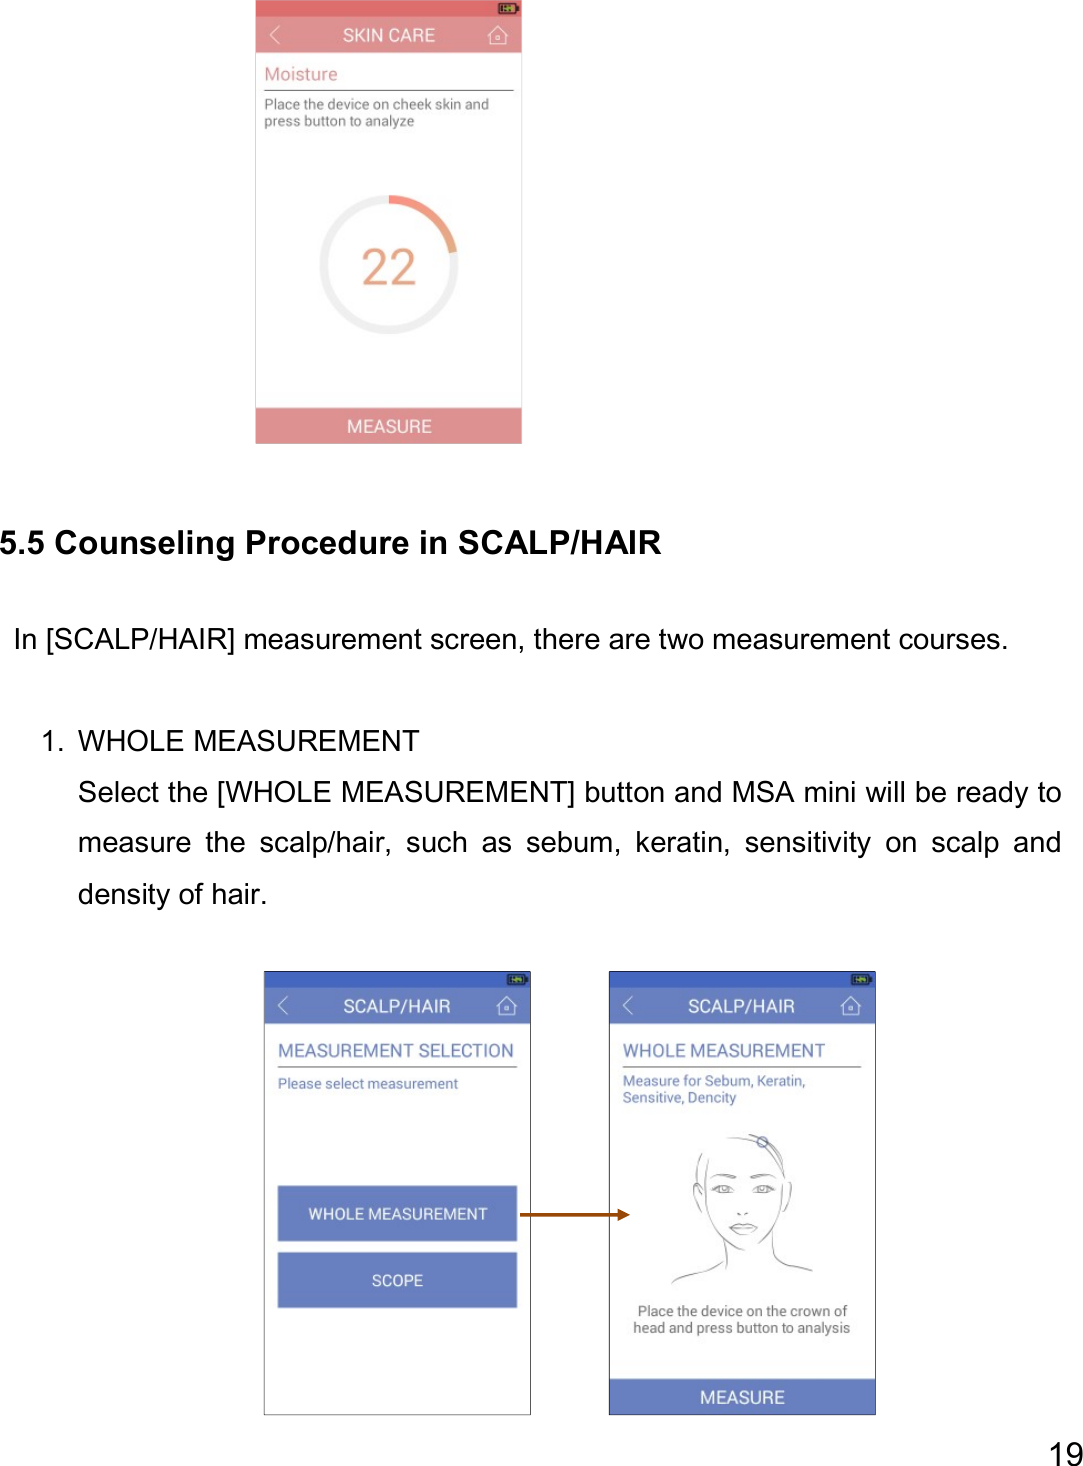  19                   5.5 Counseling Procedure in SCALP/HAIR  In [SCALP/HAIR] measurement screen, there are two measurement courses.  1. WHOLE MEASUREMENT Select the [WHOLE MEASUREMENT] button and MSA mini will be ready to measure  the  scalp/hair,  such  as  sebum,  keratin,  sensitivity  on  scalp  and density of hair.             